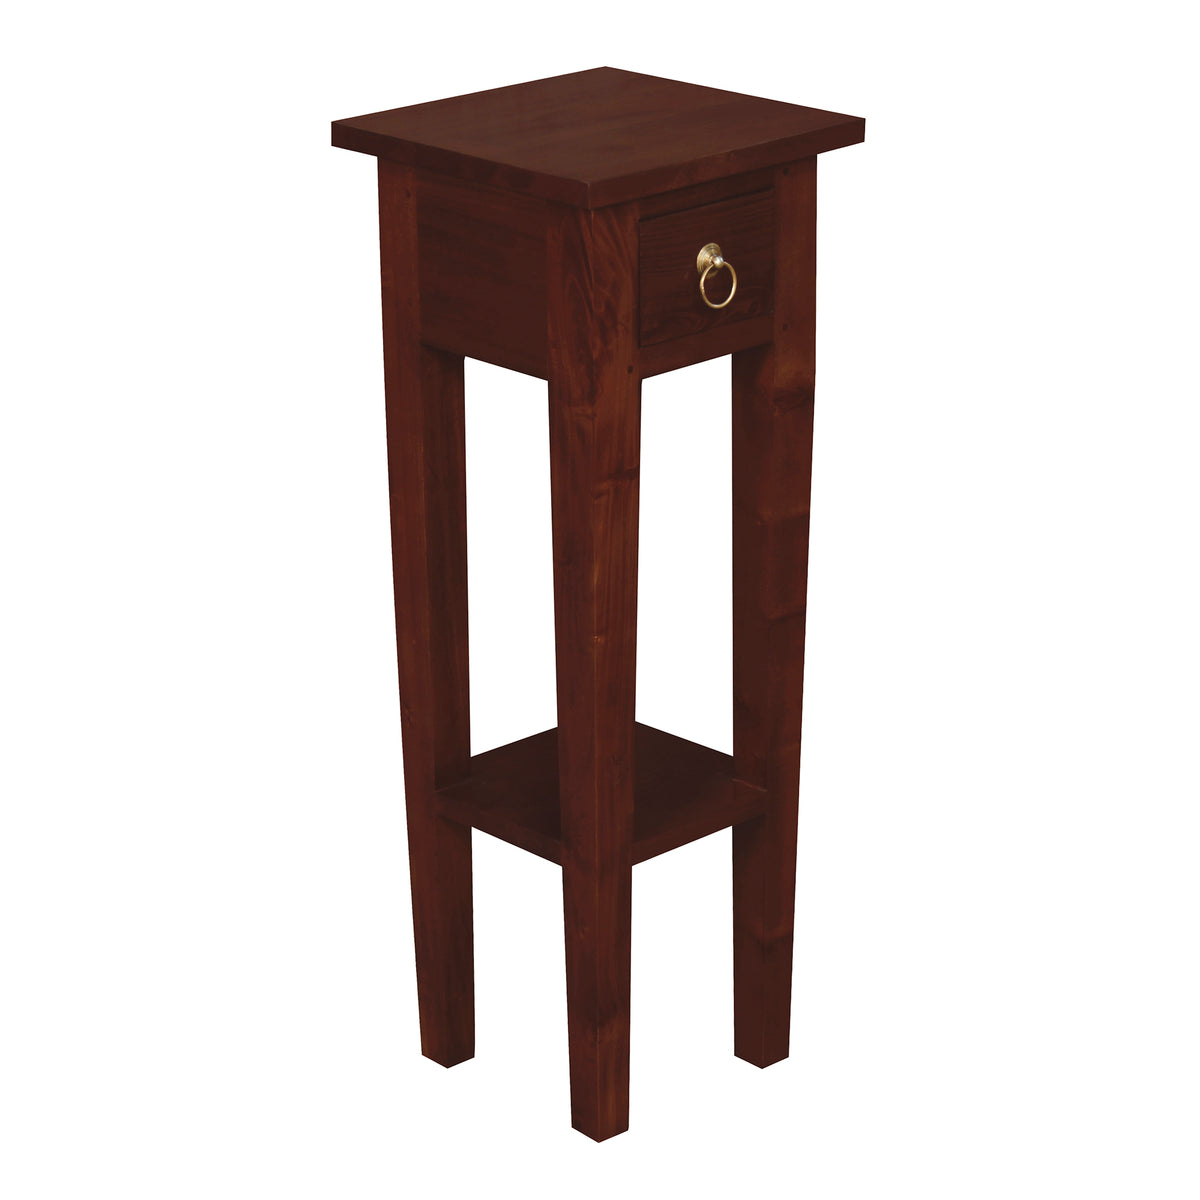 Fleur Timber 1 Drawer Plant Stand - Mahogany - Notbrand